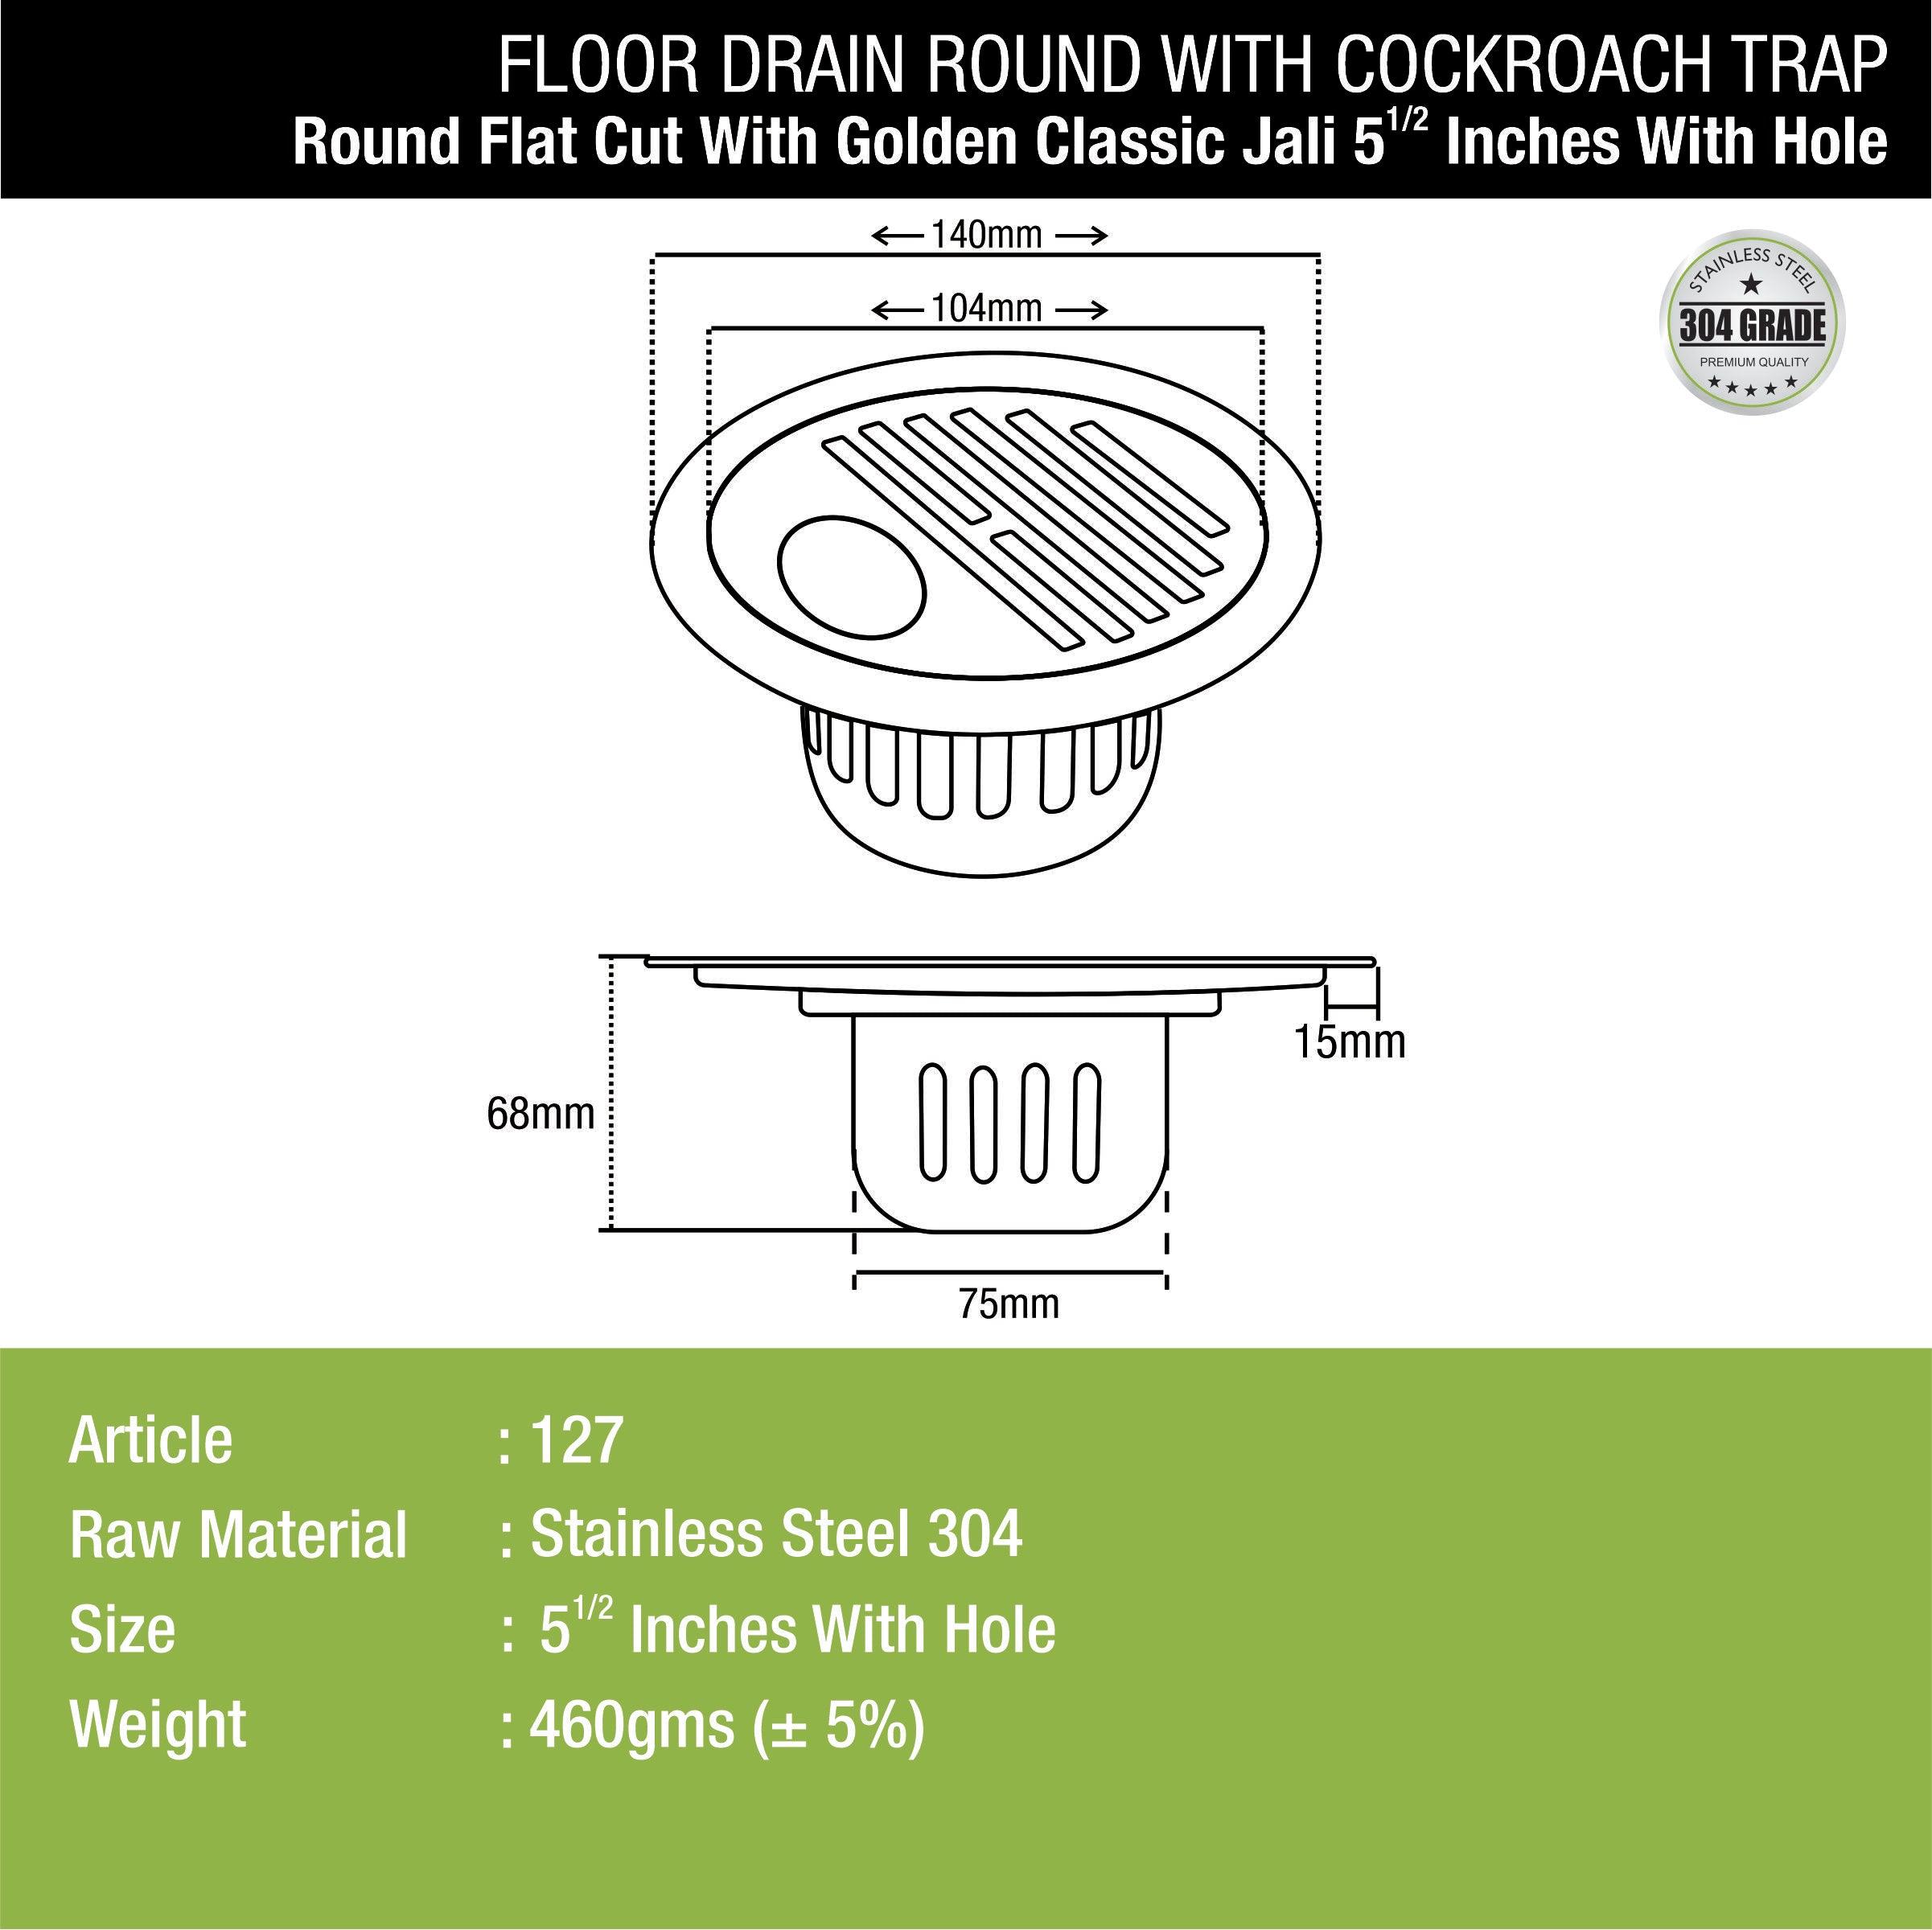 Golden Classic Jali Round Flat Cut Floor Drain (5.5 inches) with Hole and Cockroach Trap dimensions and sizes